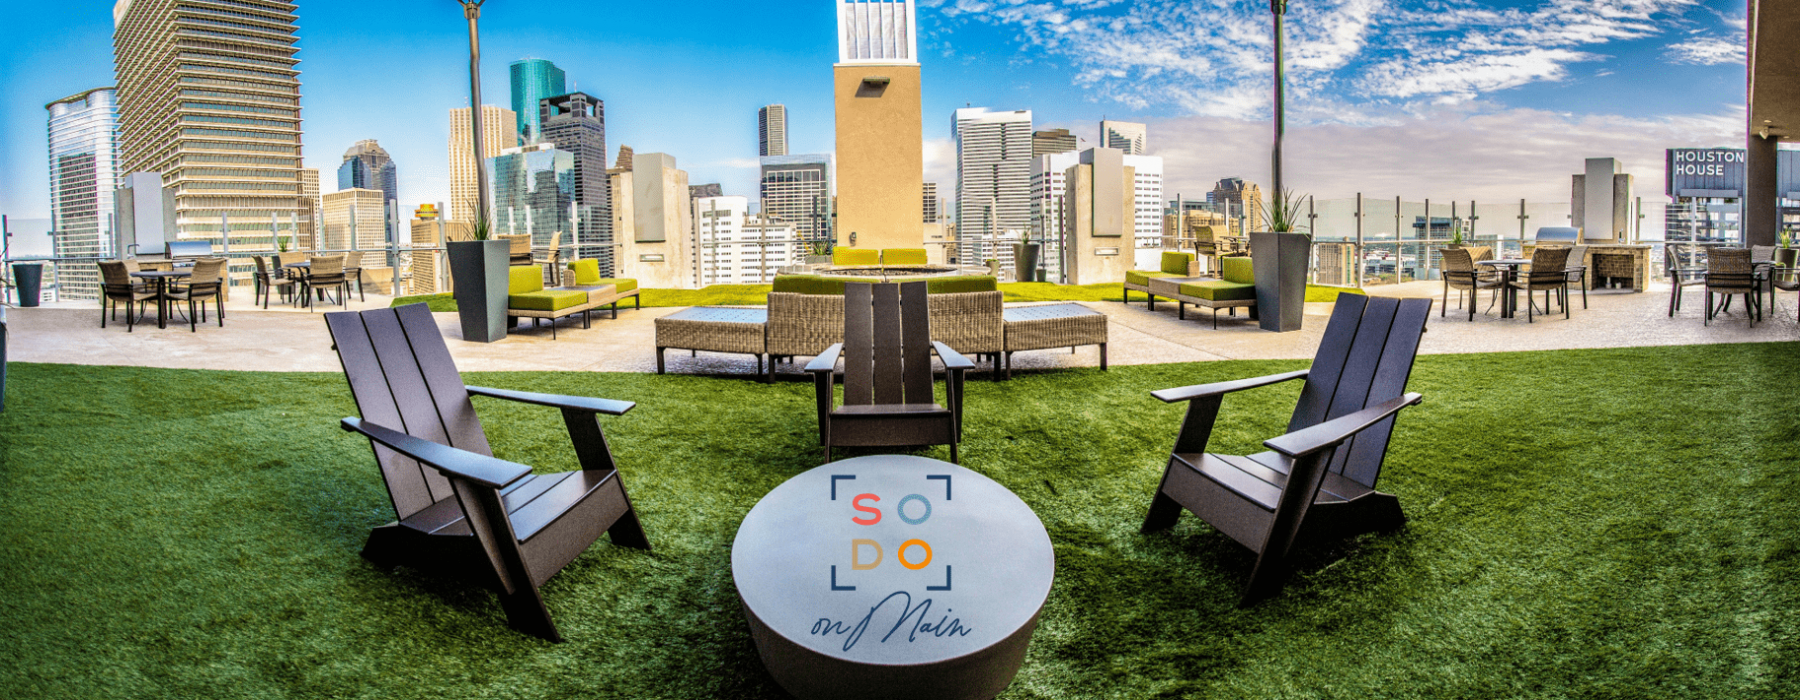 rooftop seating and views of city